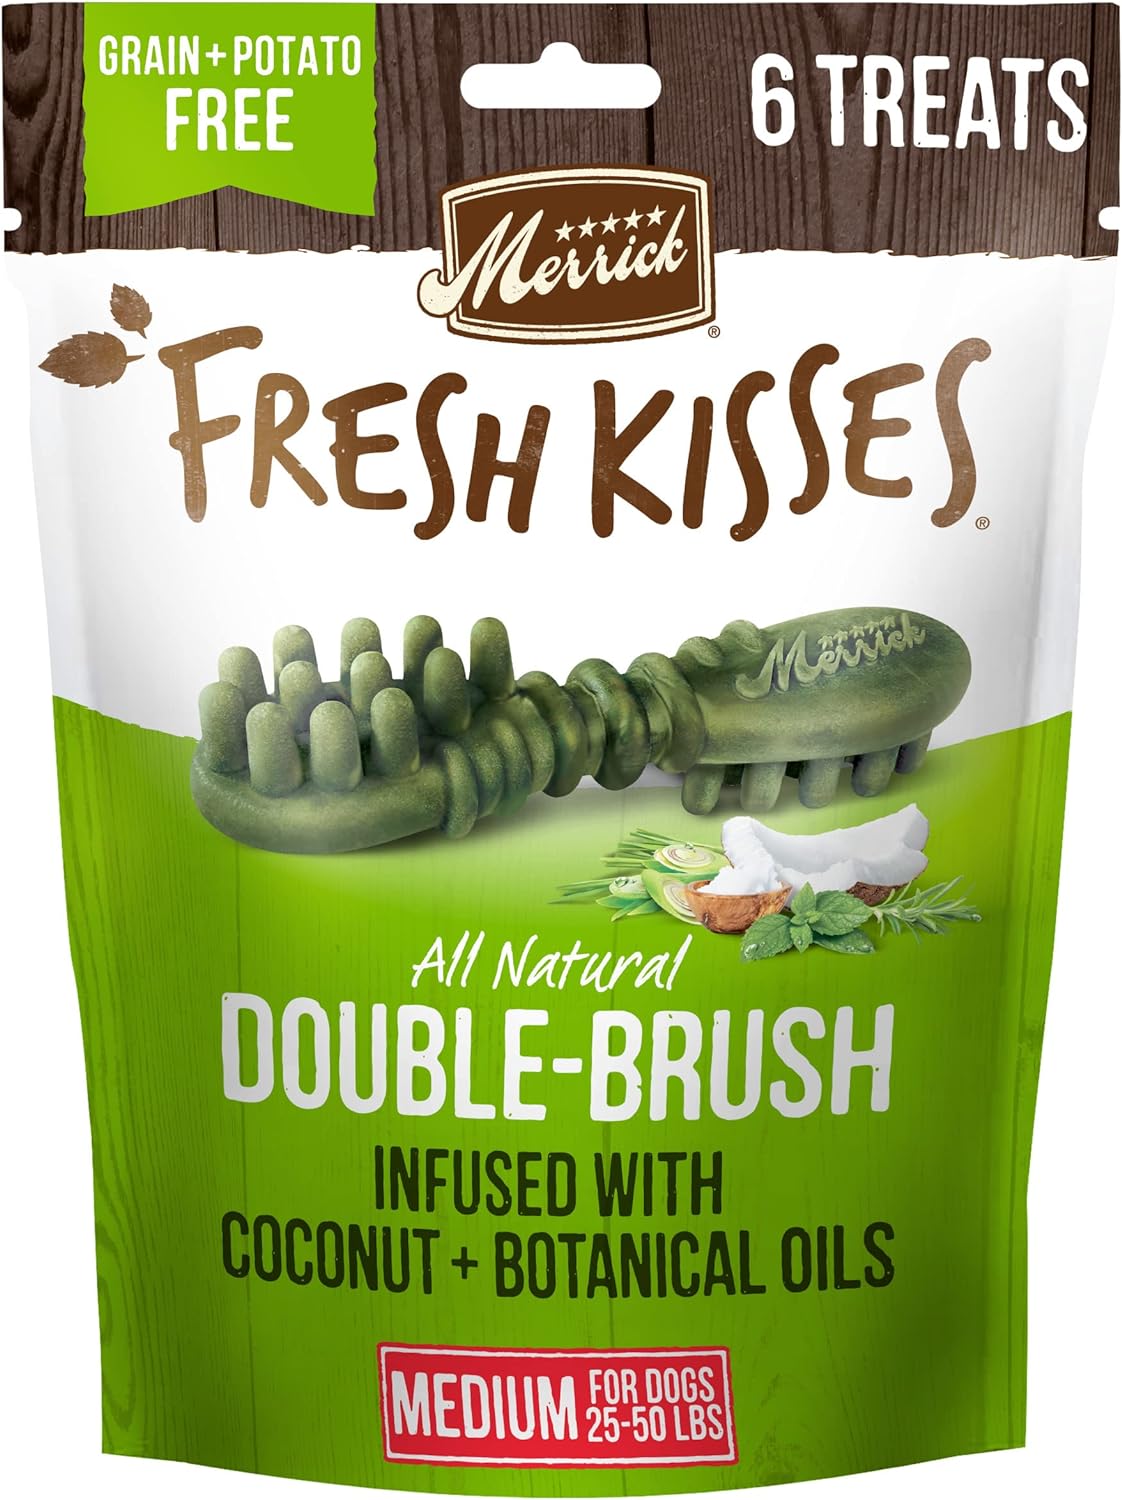 Merrick Fresh Kisses Natural Dental Chews Infused With Coconut And Botanical Oils For Medium Dogs 25-50 Lbs - 6 ct. Bag